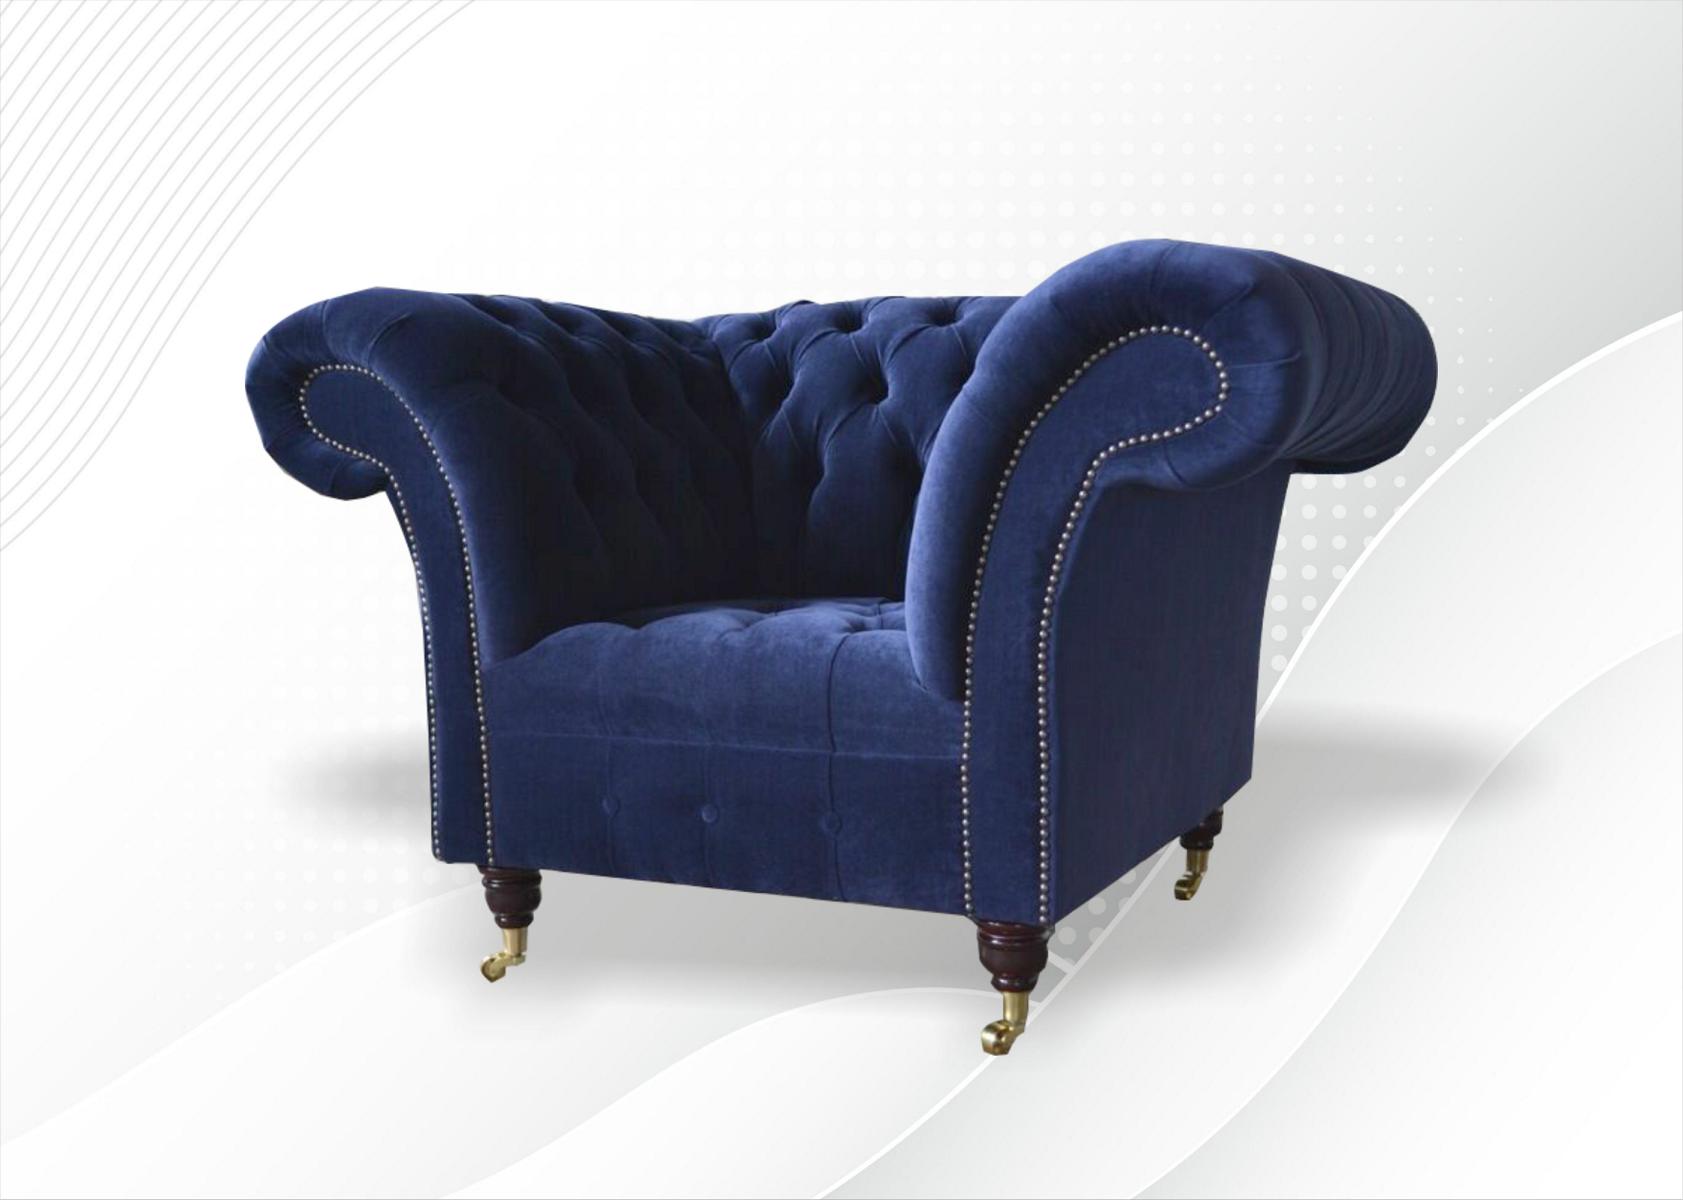 Lounge Club Sessel Couch Polster Couch 1 Sitzer Chesterfield Möbel Sofa